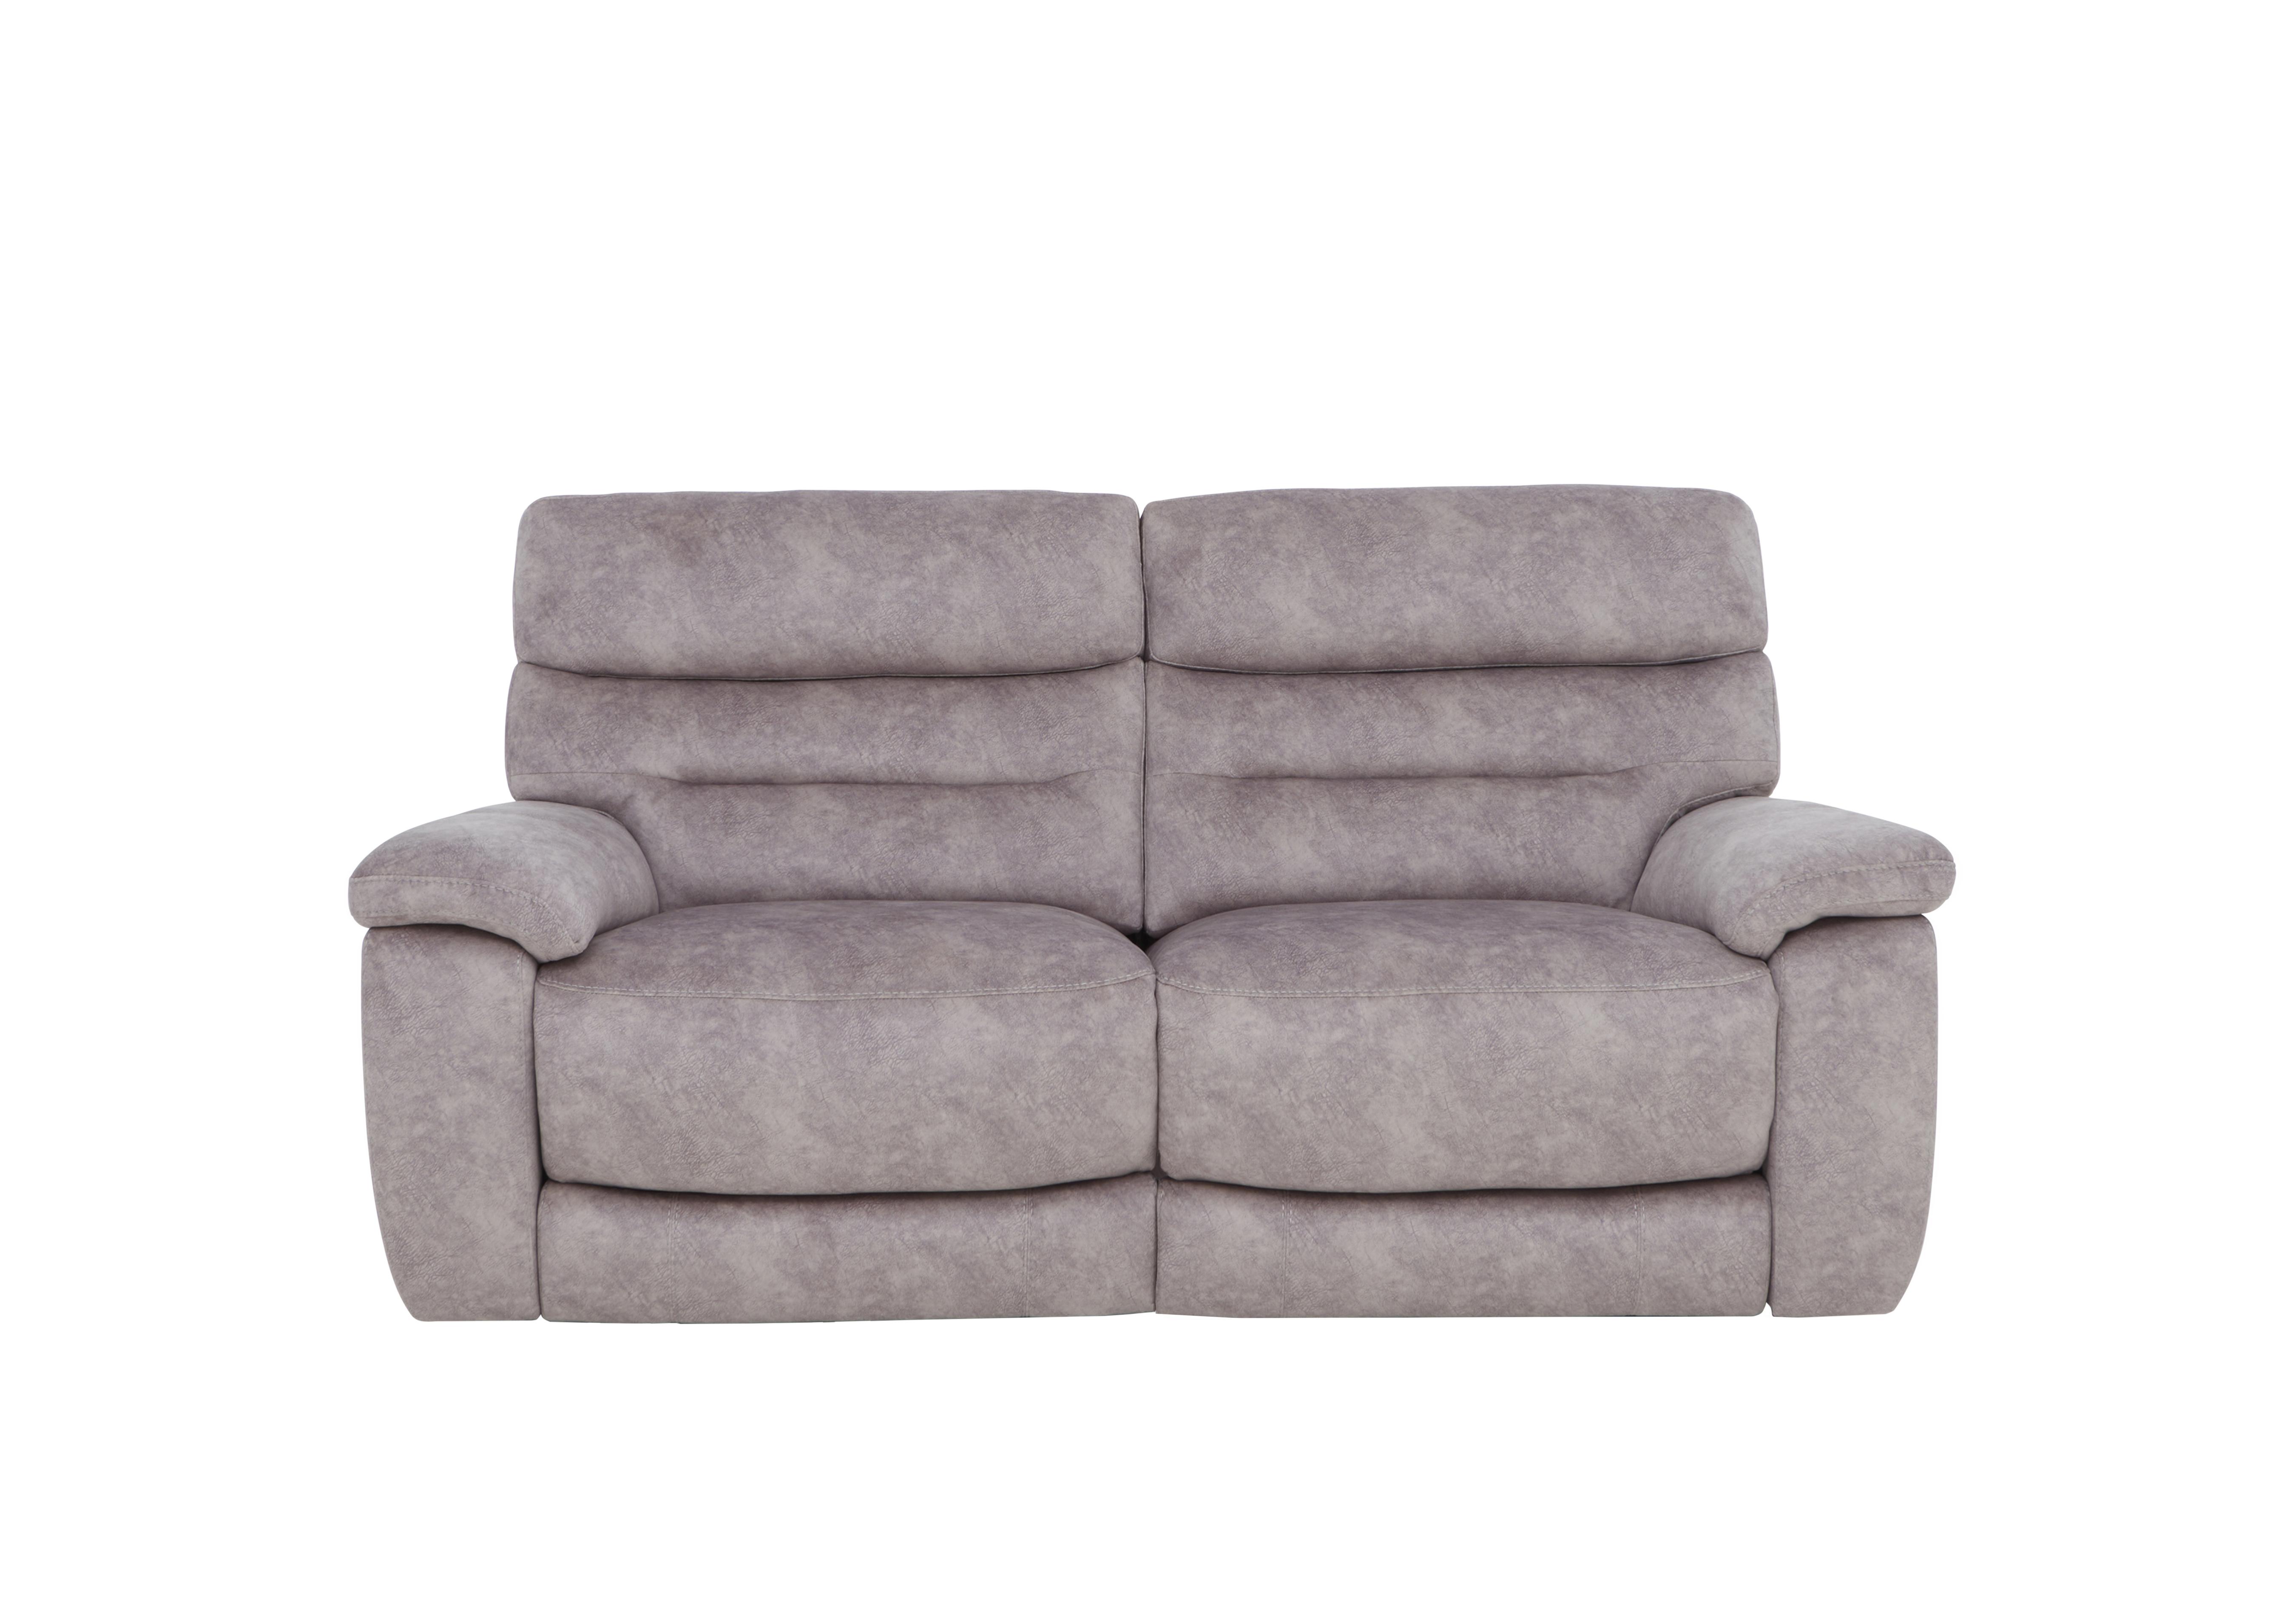 Nimbus 2 Seater Fabric Power Recliner Sofa with Power Headrests and Power Lumbar in Bfa-Bnn-R28 Grey on Furniture Village